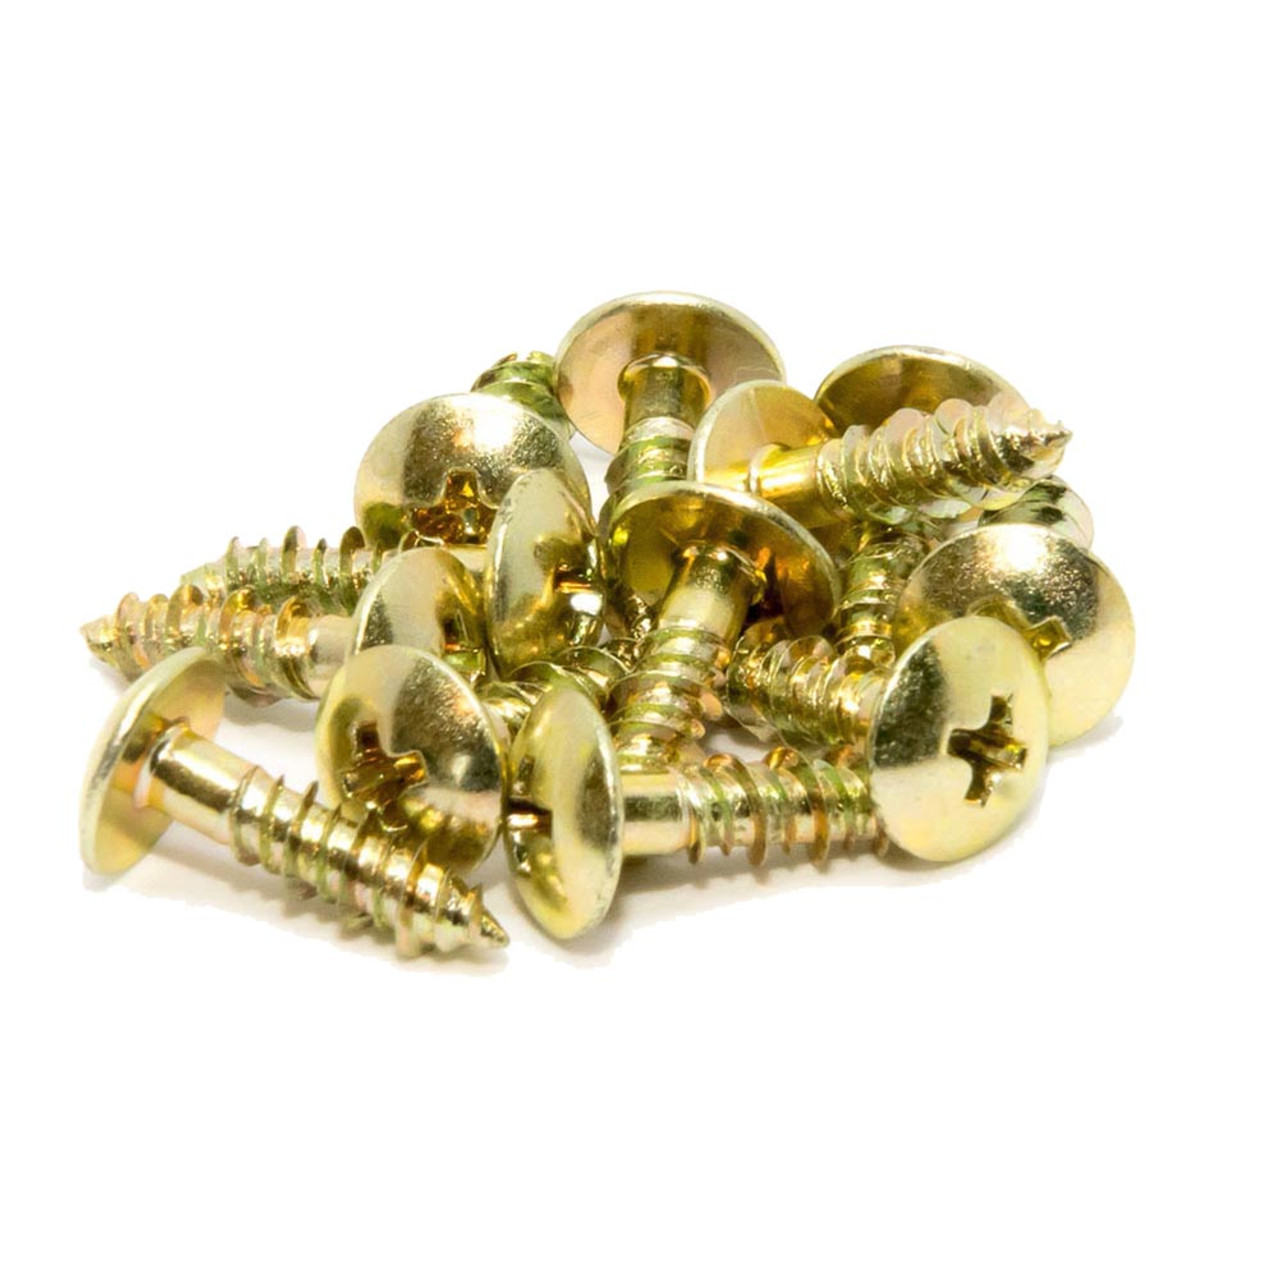 The Supplies Guys: OIC Brass Plated Roundhead Fasteners